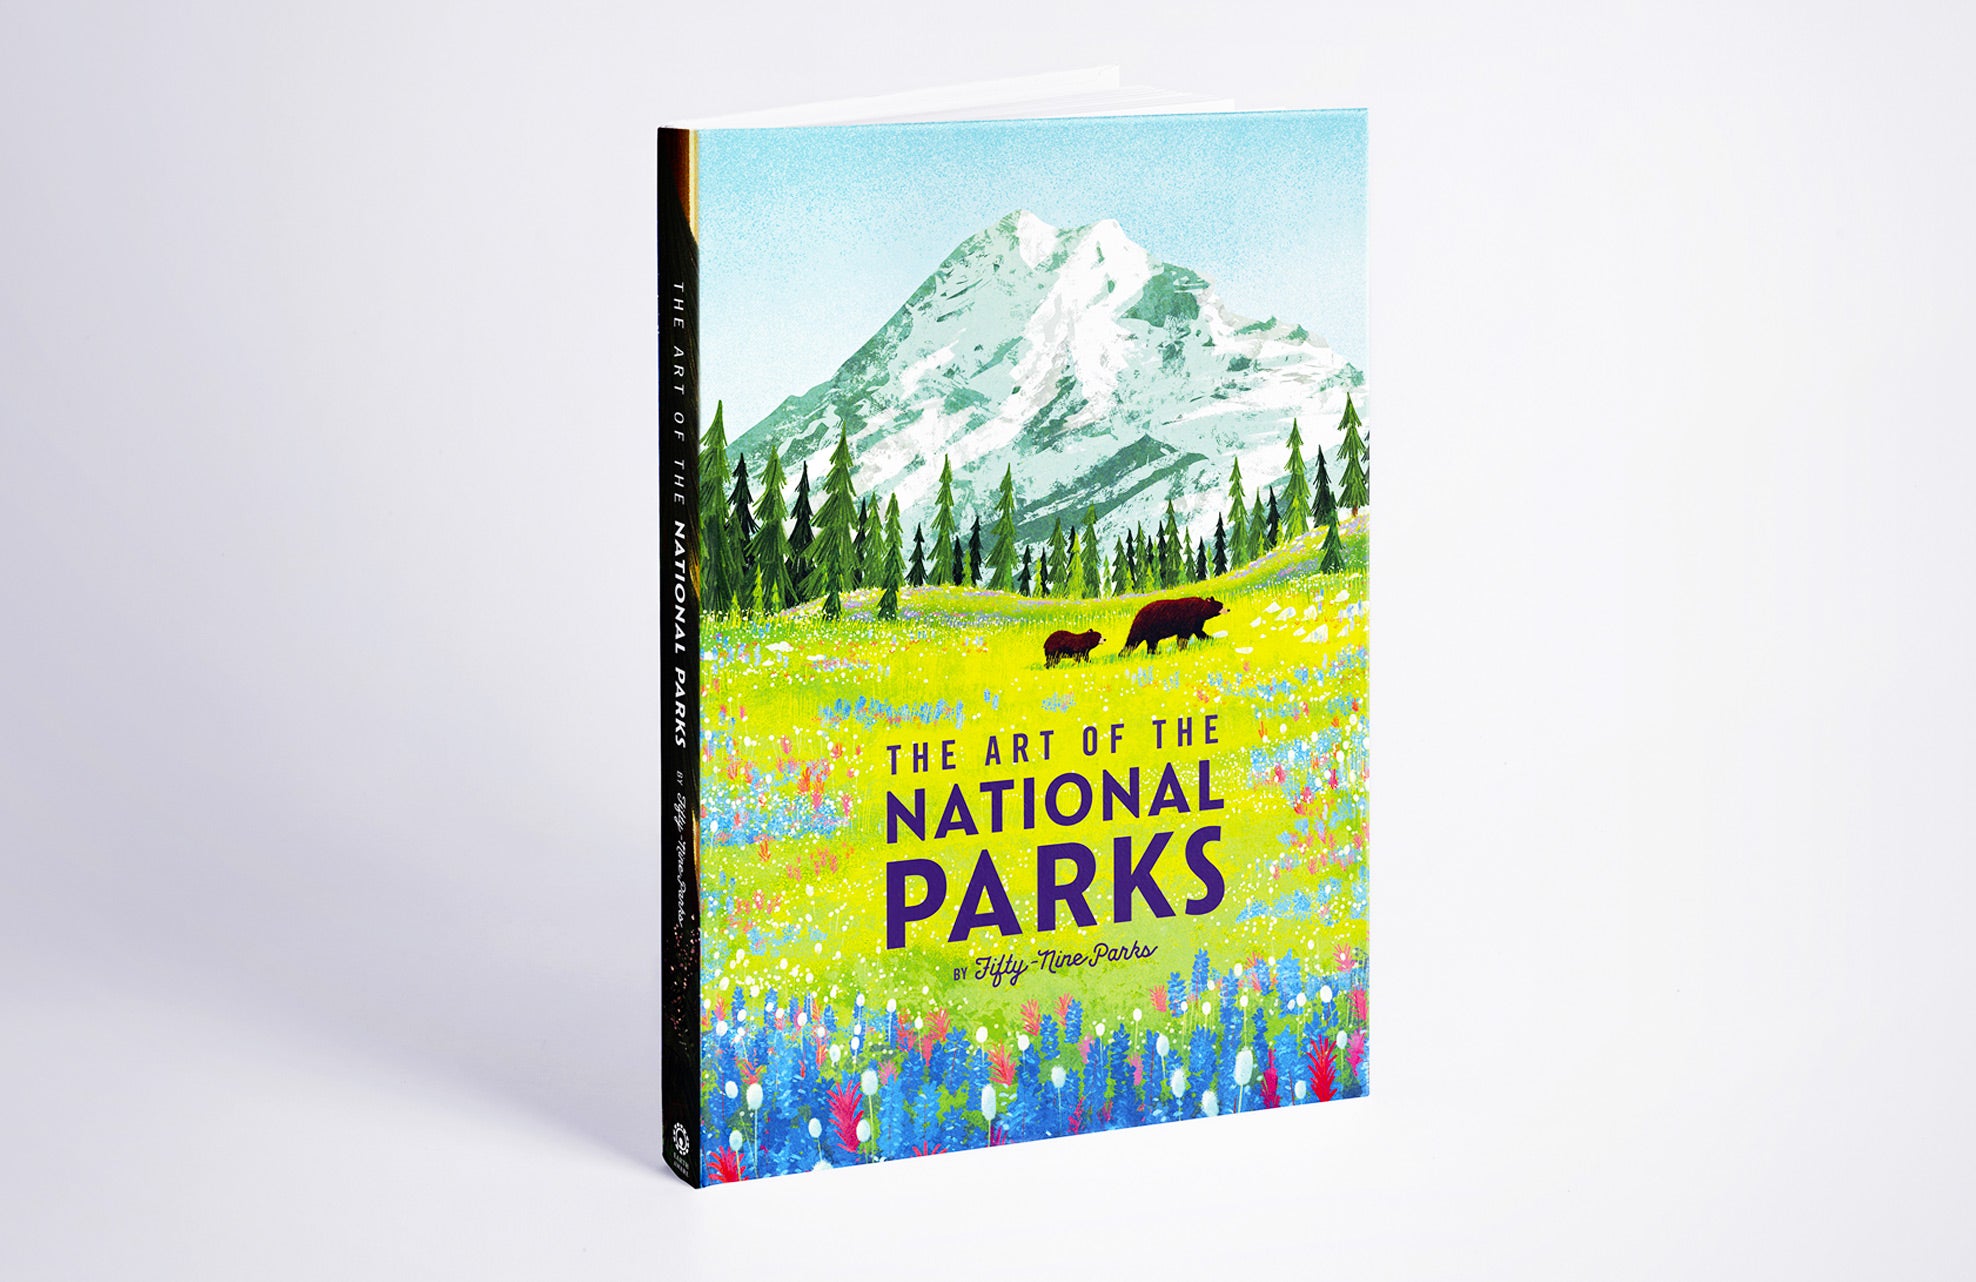 art of the national parks by fifty-nine parks book cover